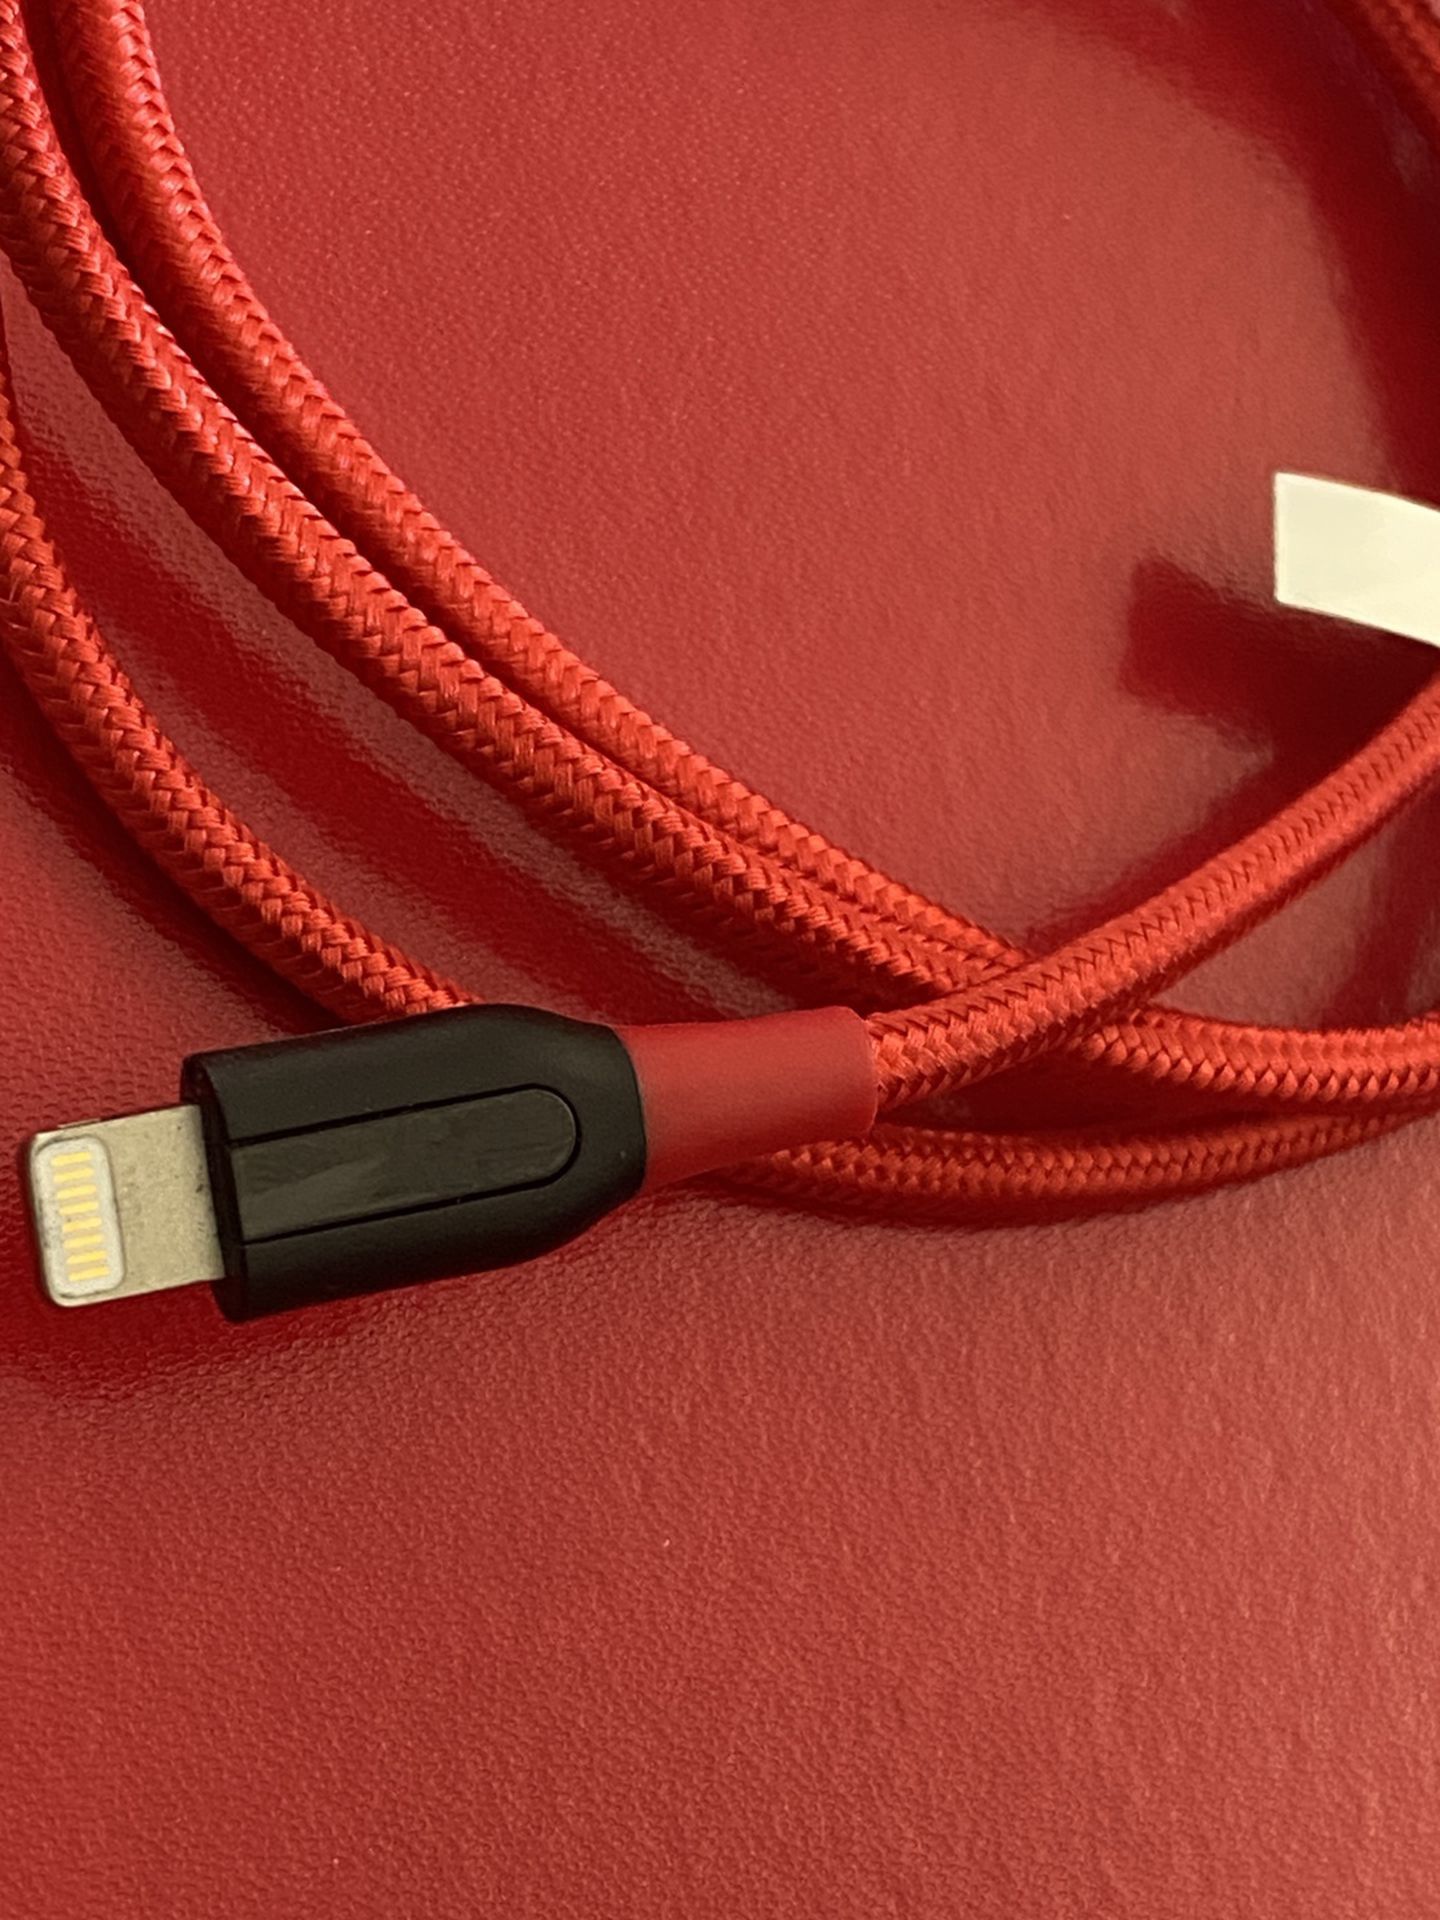 Anker iPhone USB 2.0 Cable (Red)